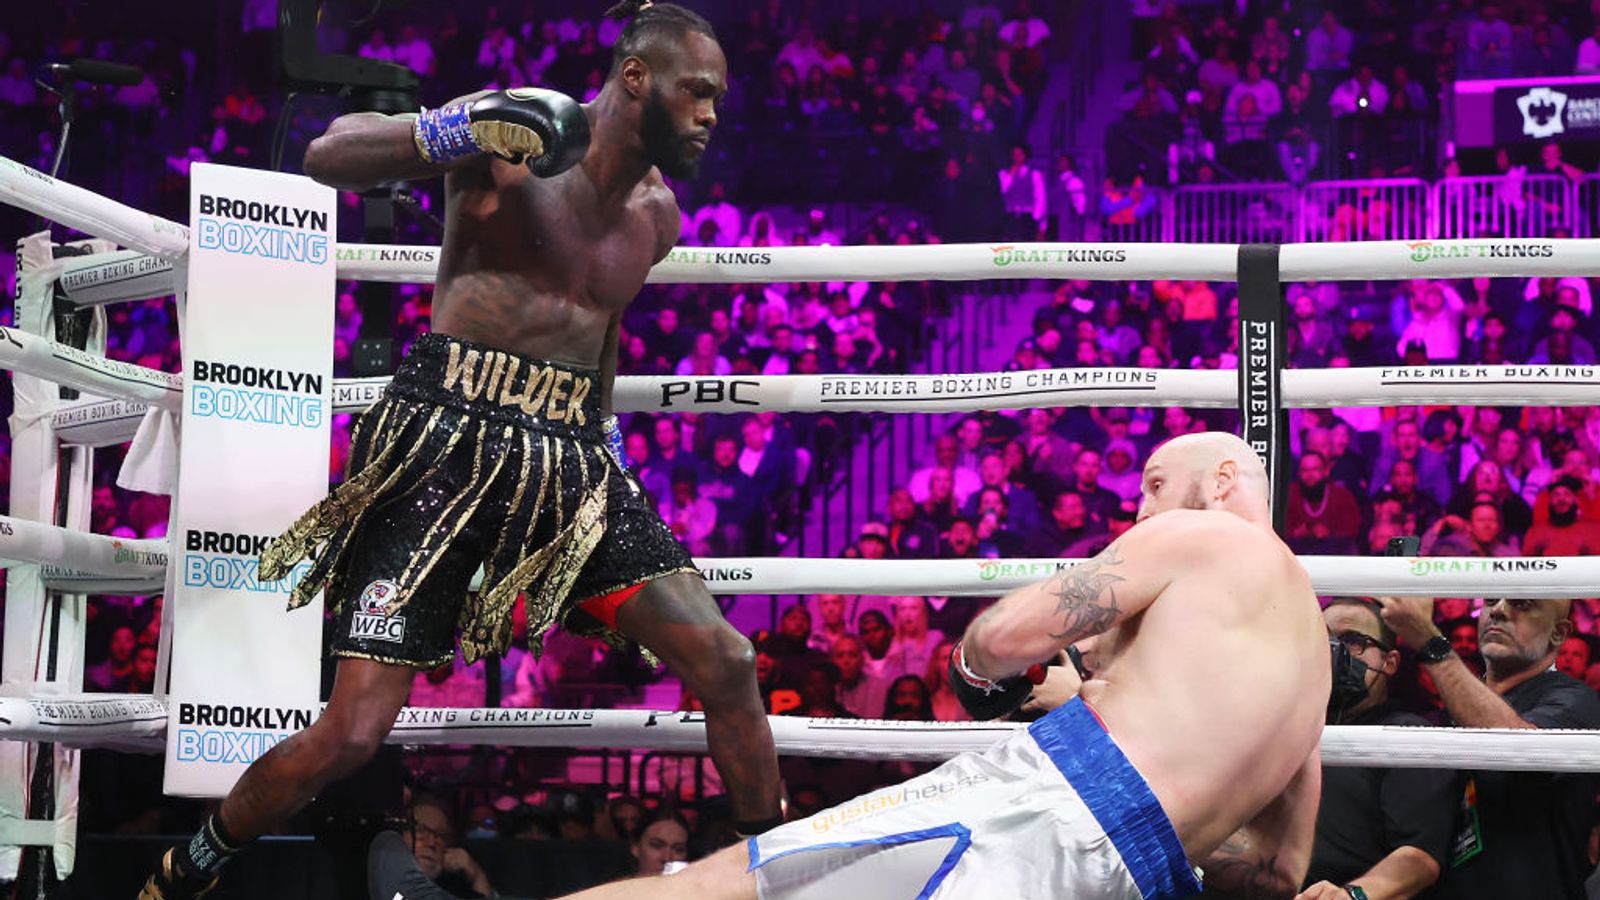 Deontay Wilder KO'd Robert Helenius in the first round during their WBC world heavyweight title eliminator bout in Brooklyn